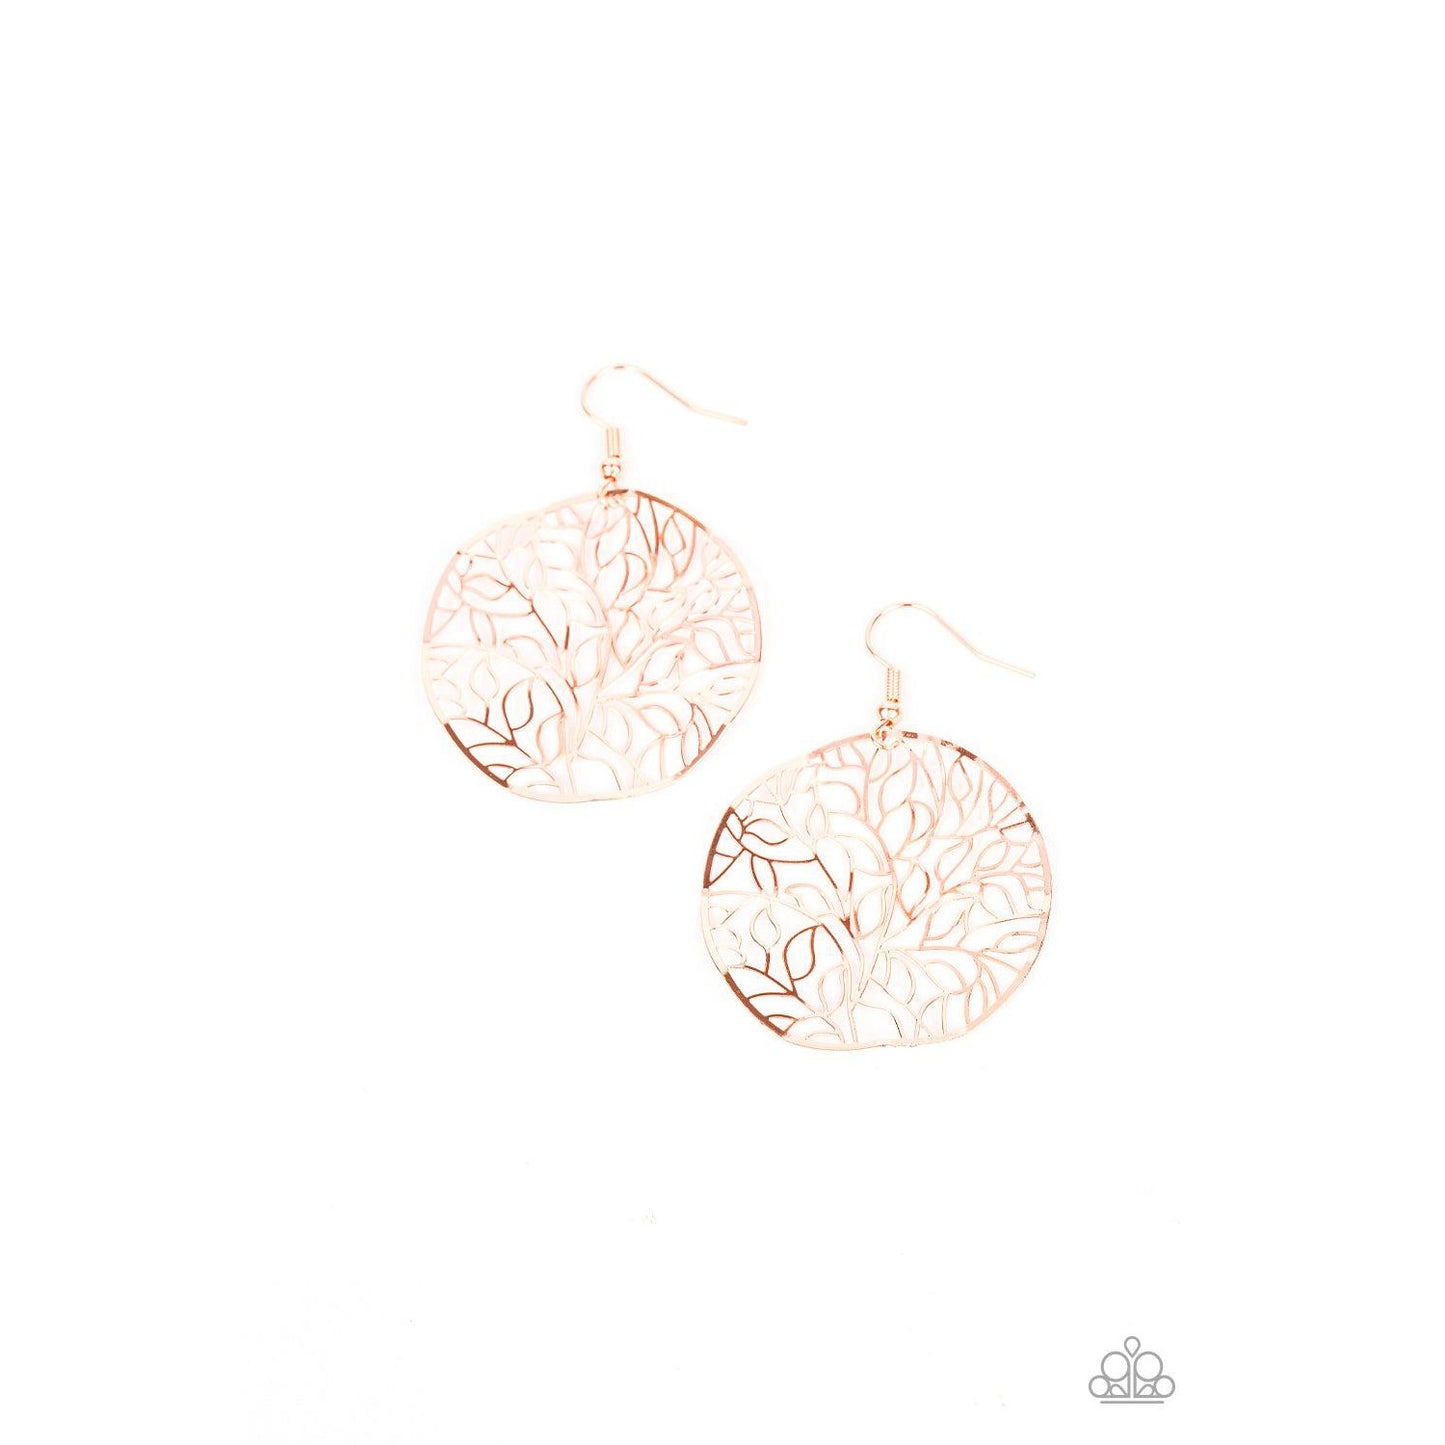 Autumn Harvest - Copper Earrings - A Large Selection Hand-Chains And Jewelry On rainbowartsreview,Women's Jewelry | Necklaces, Earrings, Bracelets